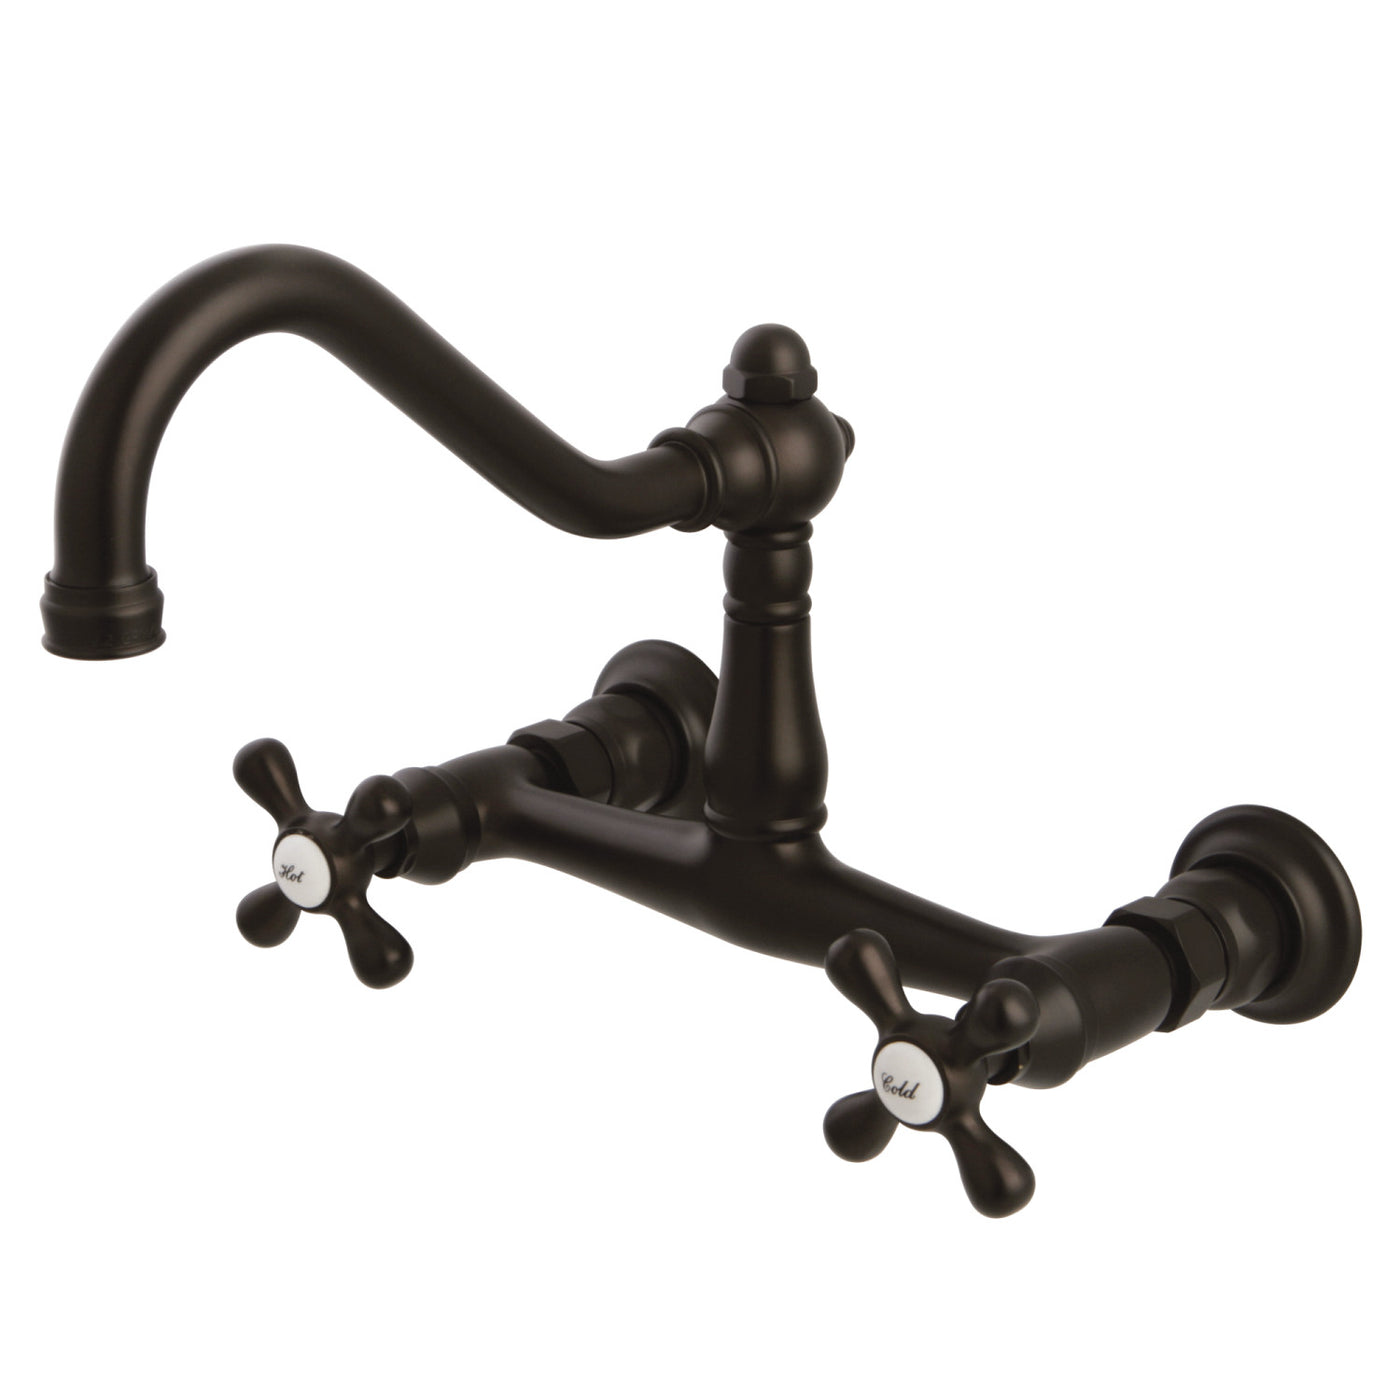 Elements of Design ES3245AX 8-Inch Center Wall Mount Bathroom Faucet, Oil Rubbed Bronze